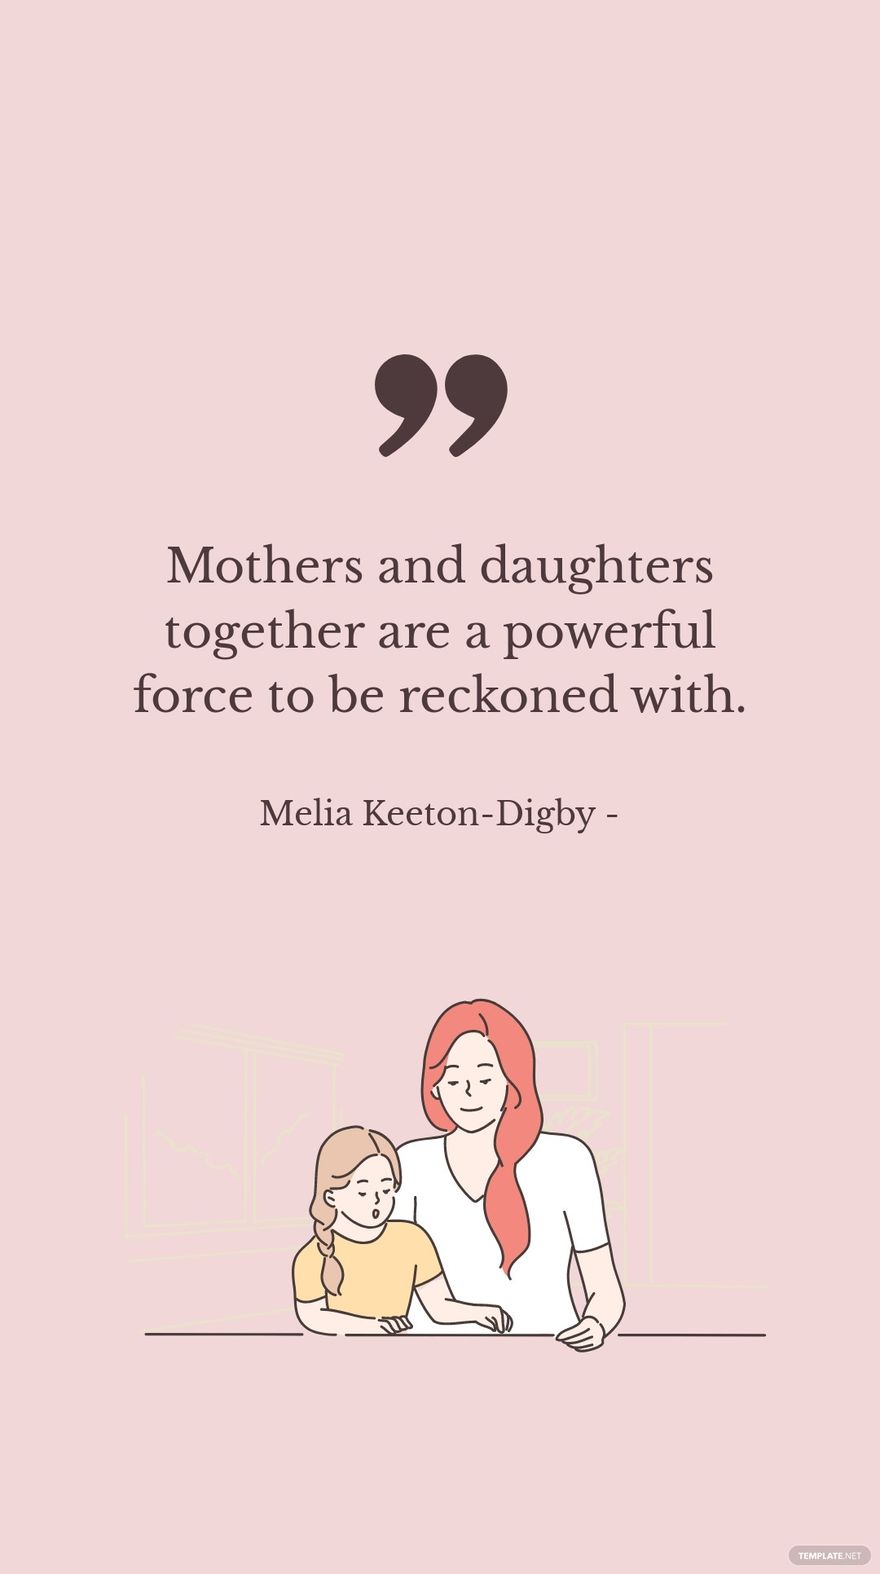 Melia Keeton-Digby - Mothers and daughters together are a powerful force to be reckoned with. in JPG